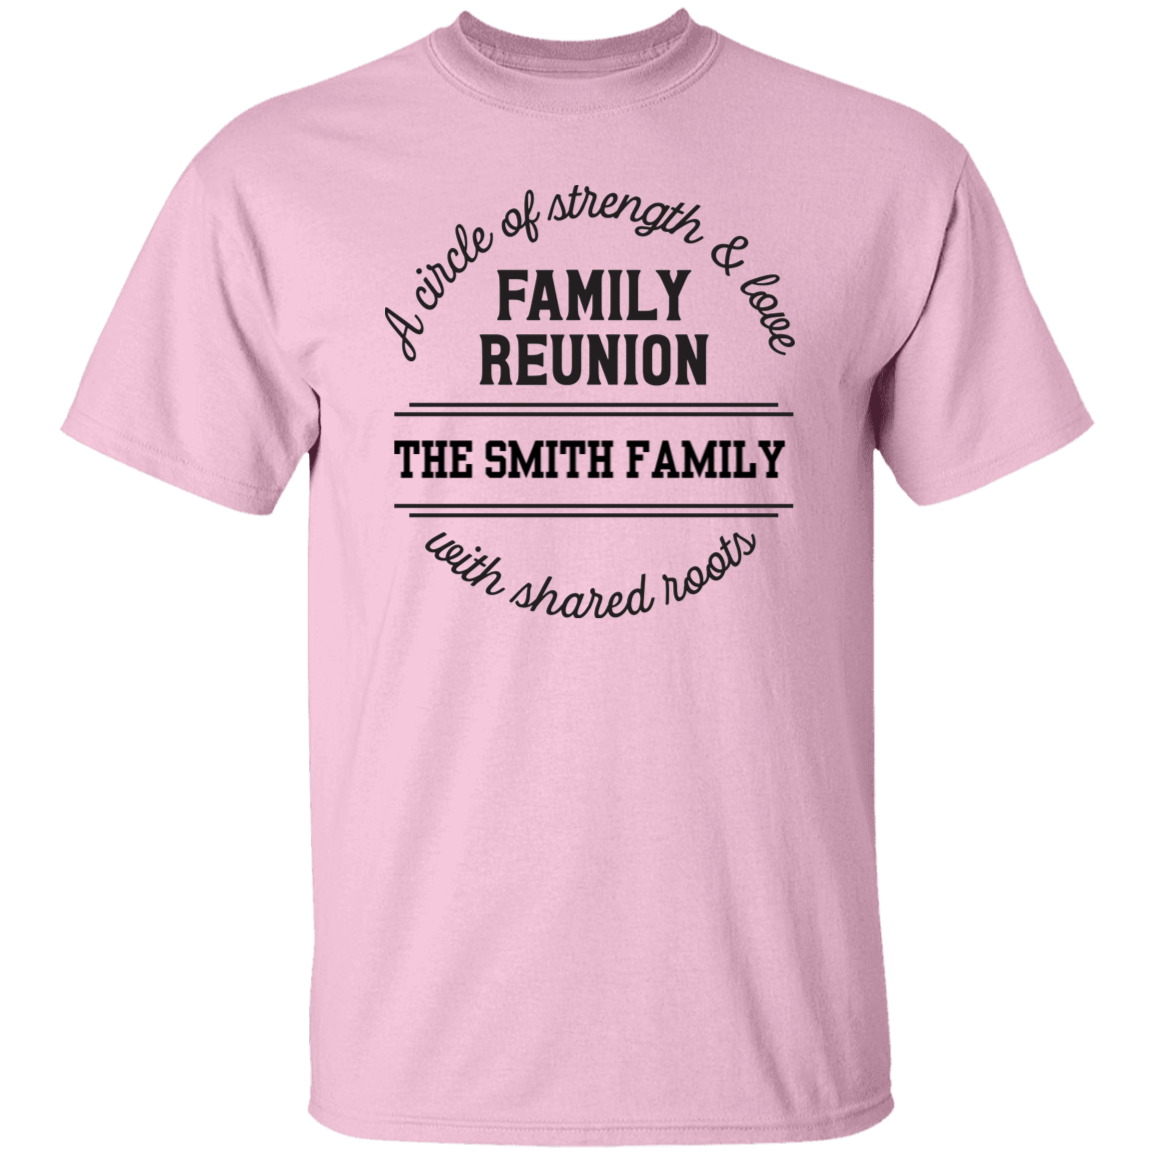 A Circle of Strength and Love Family Reunion Personalized T-Shirt